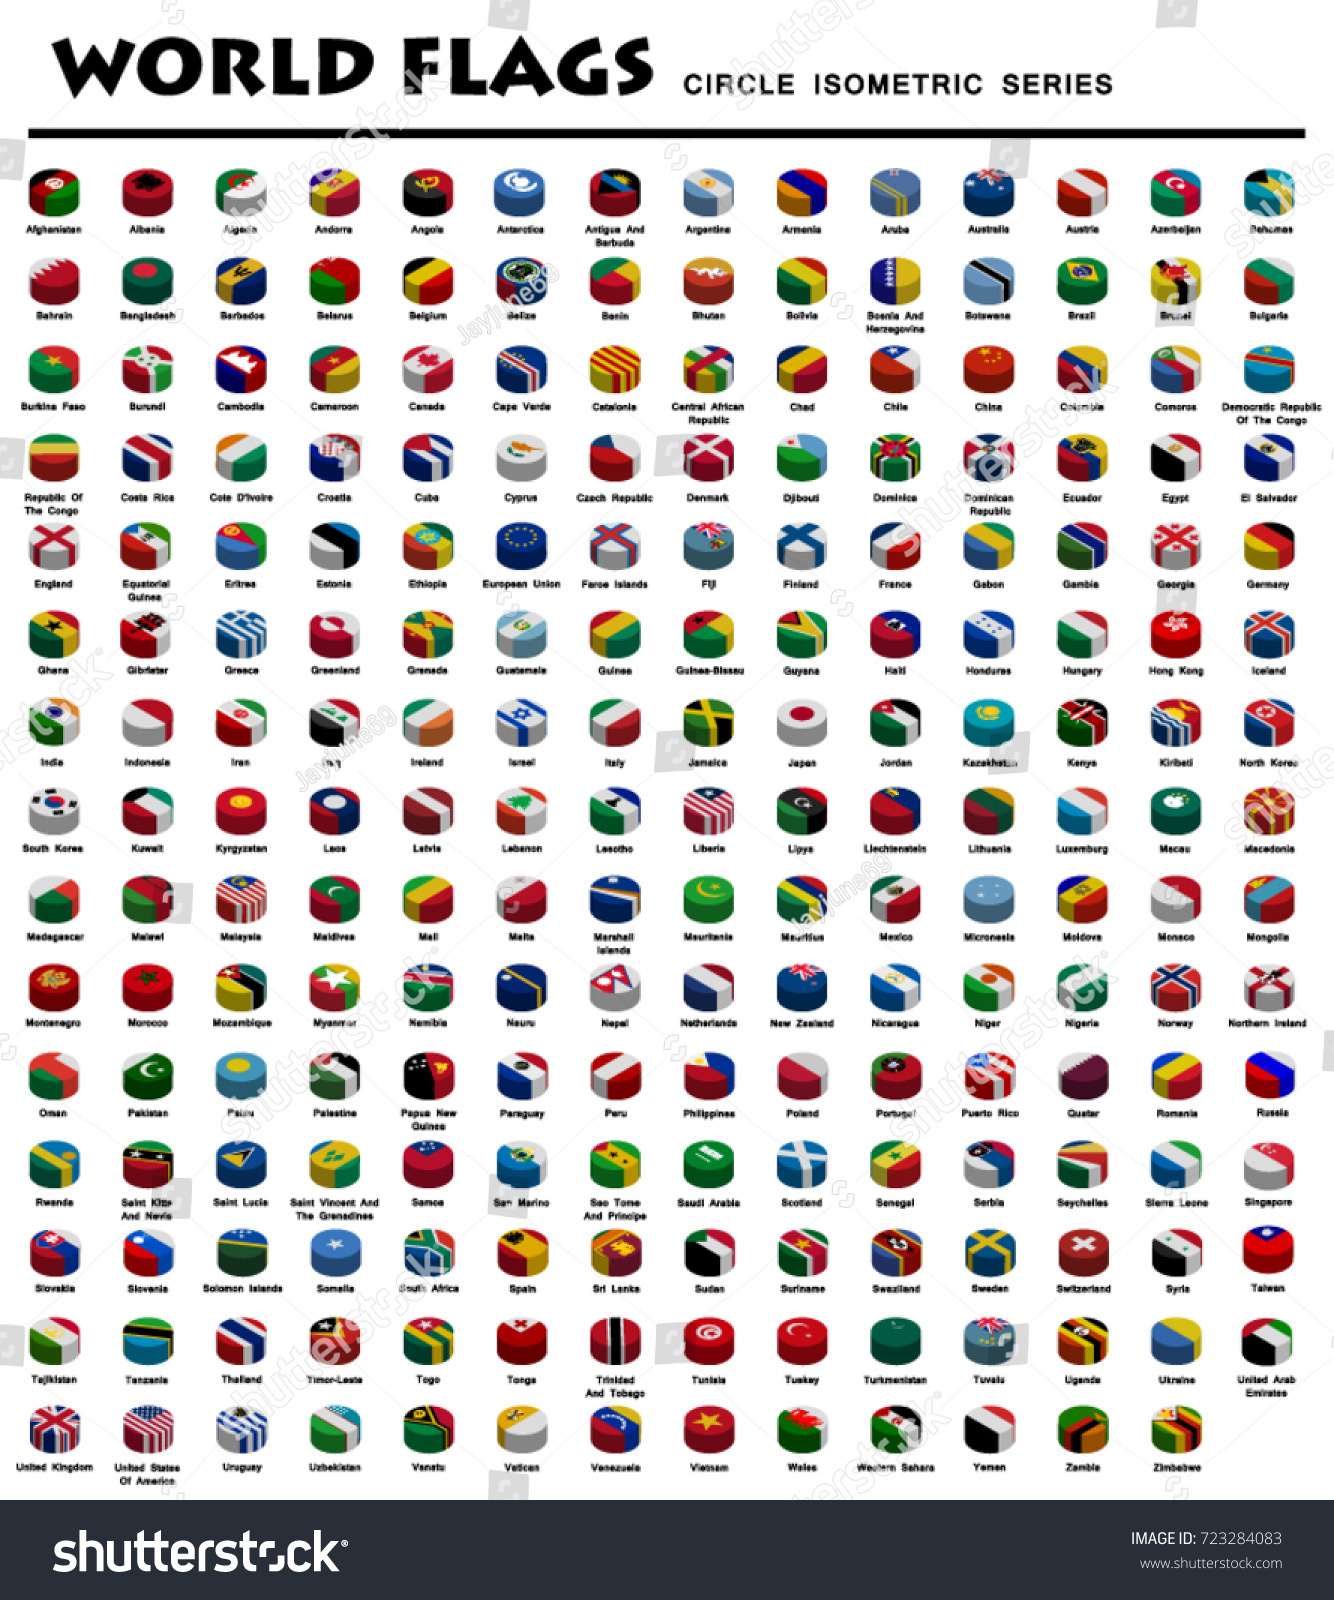 Isometric Circle Flags Of World #723284083